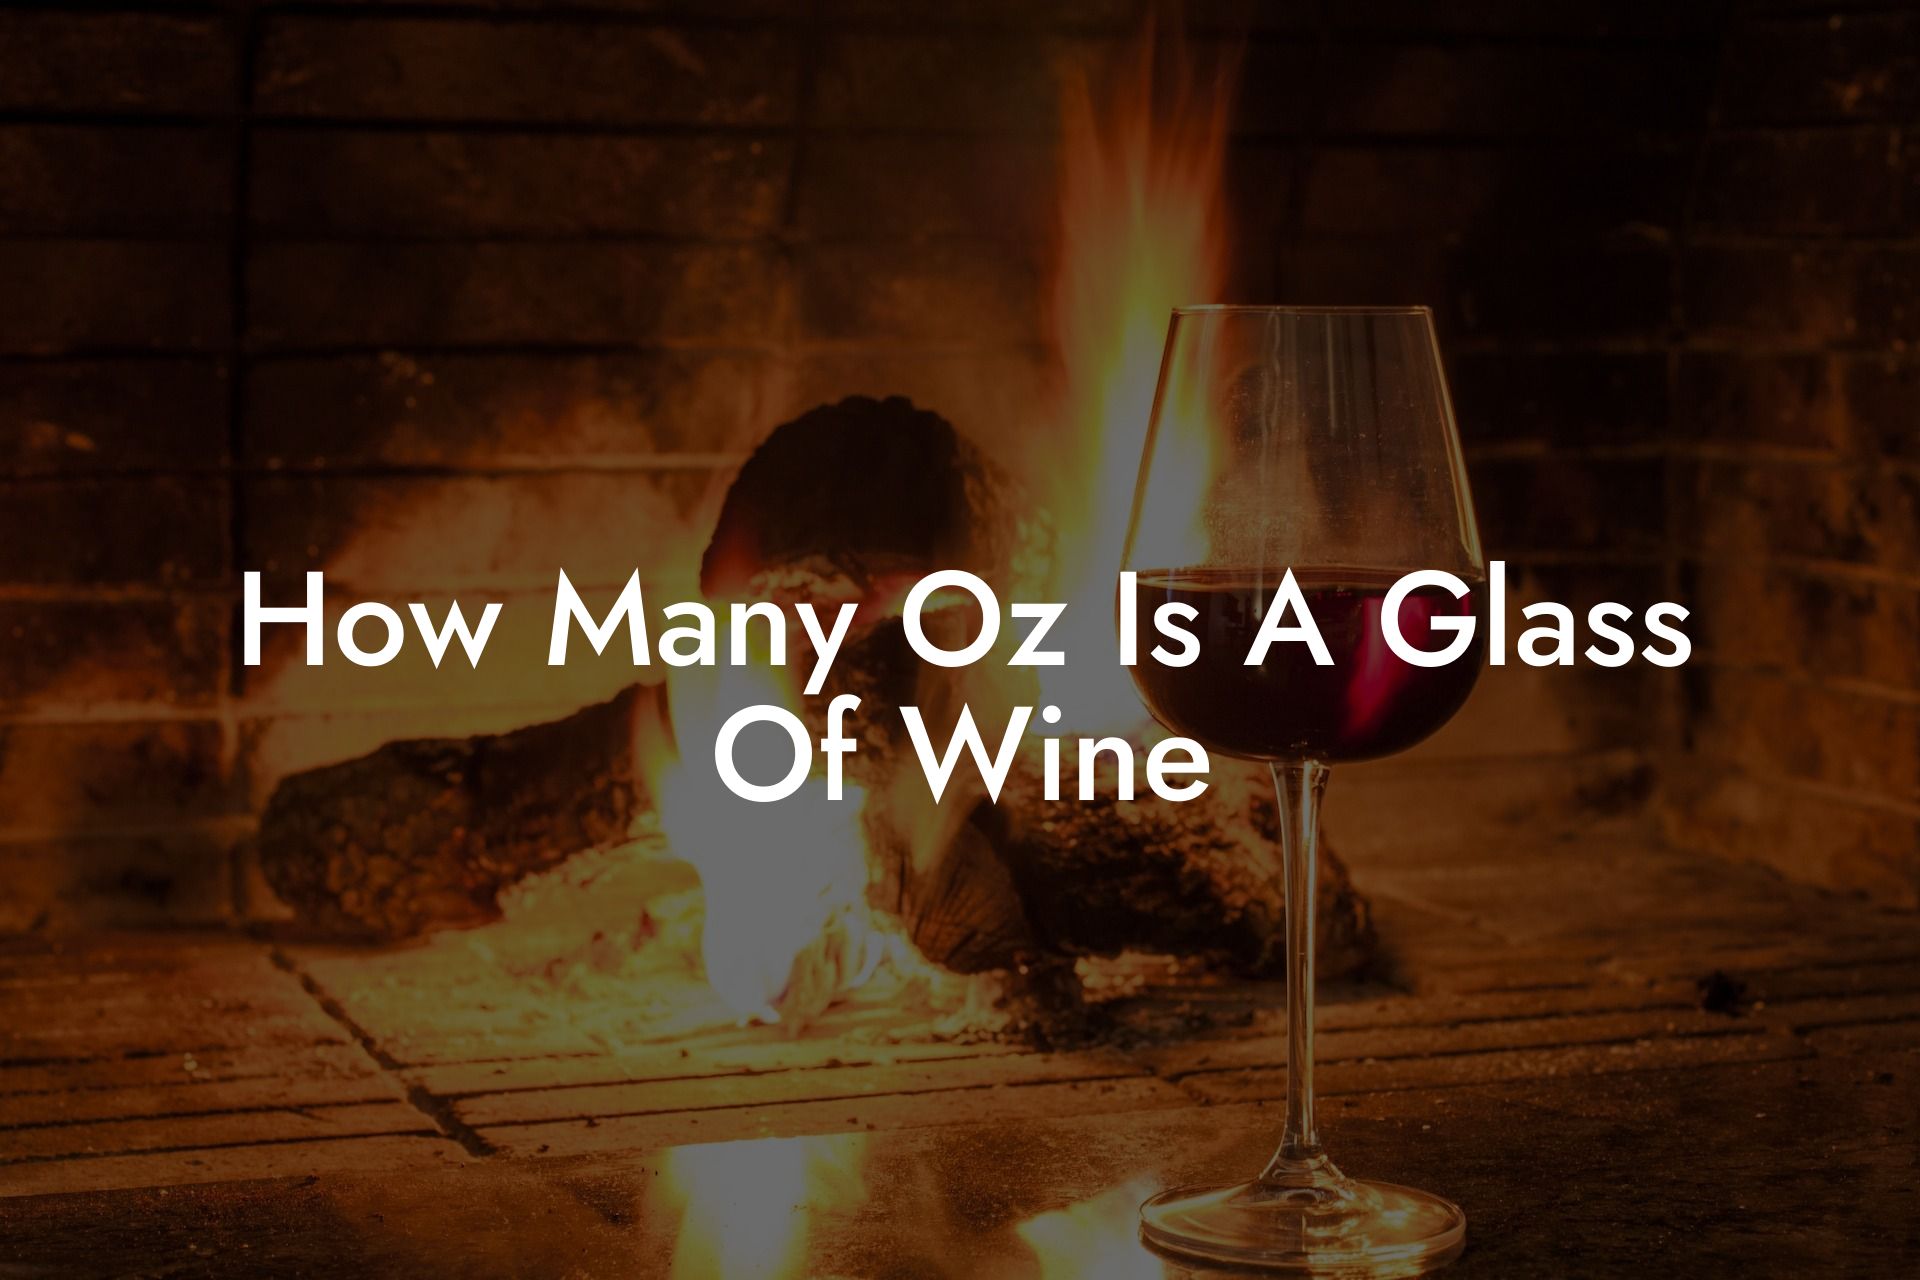 How Many Oz Is A Glass Of Wine